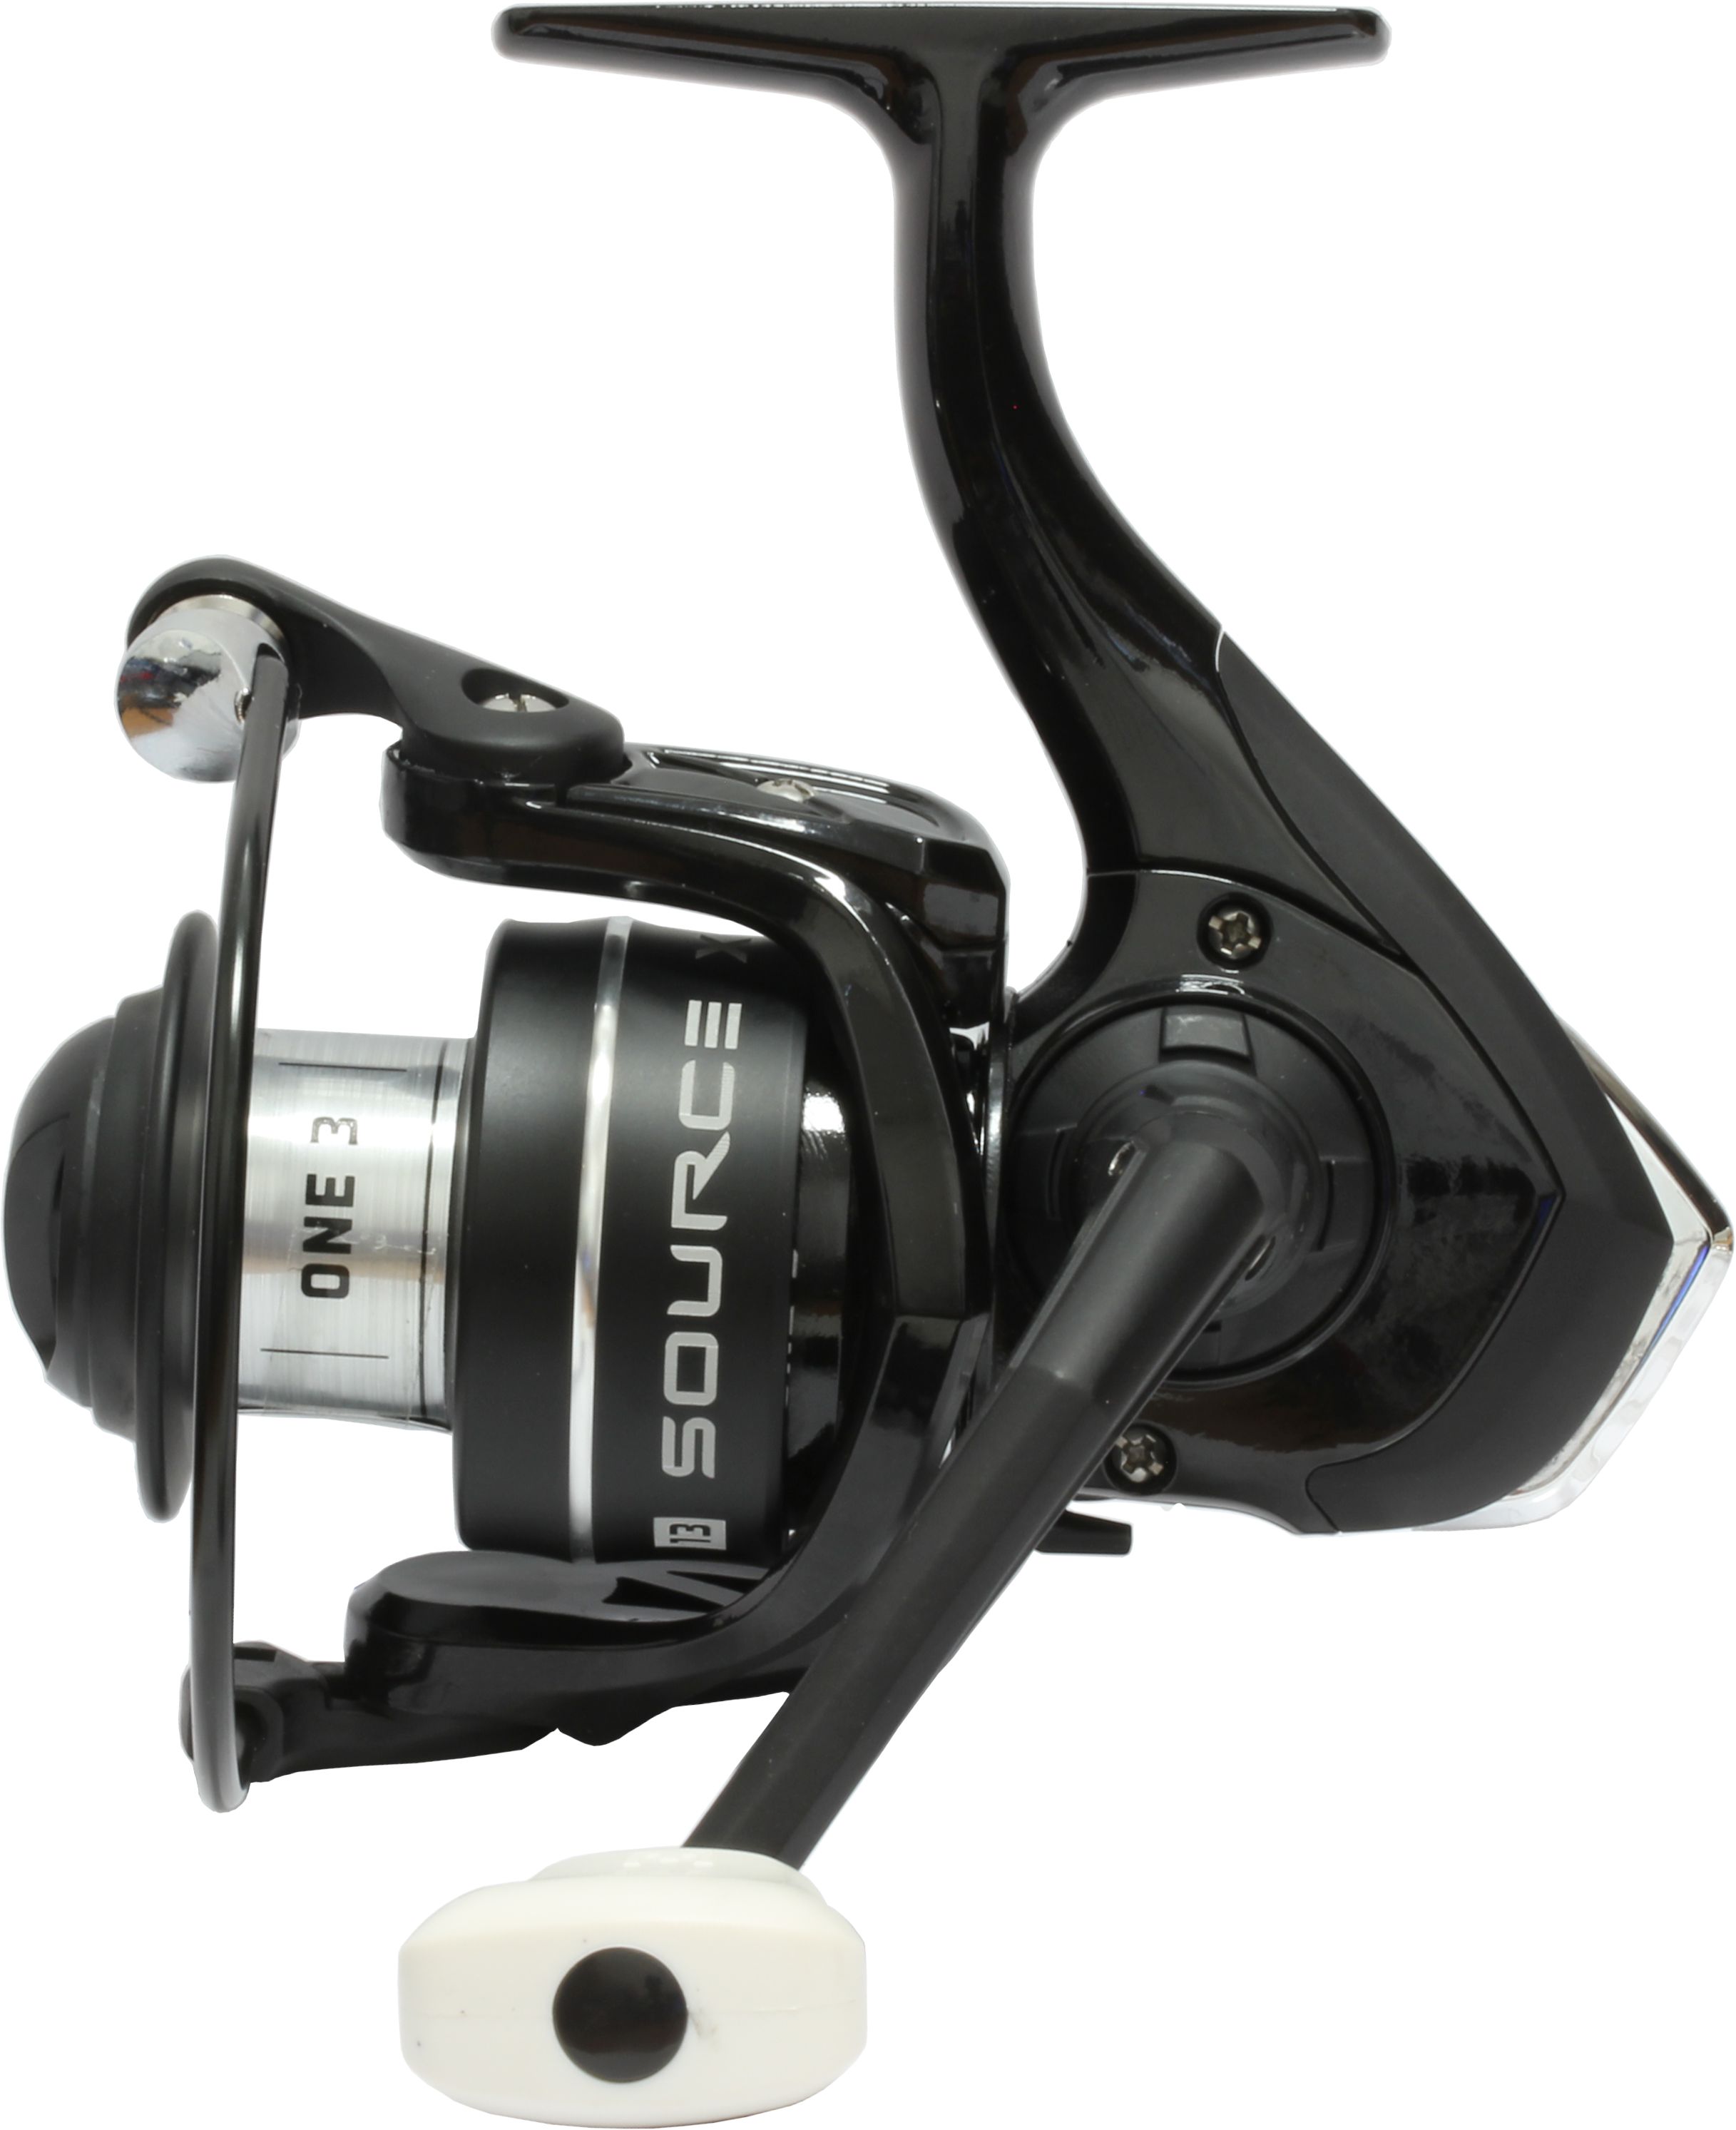 Deals on 13 Fishing Spinning Fishing Reels ON SALE Up to 19% Off